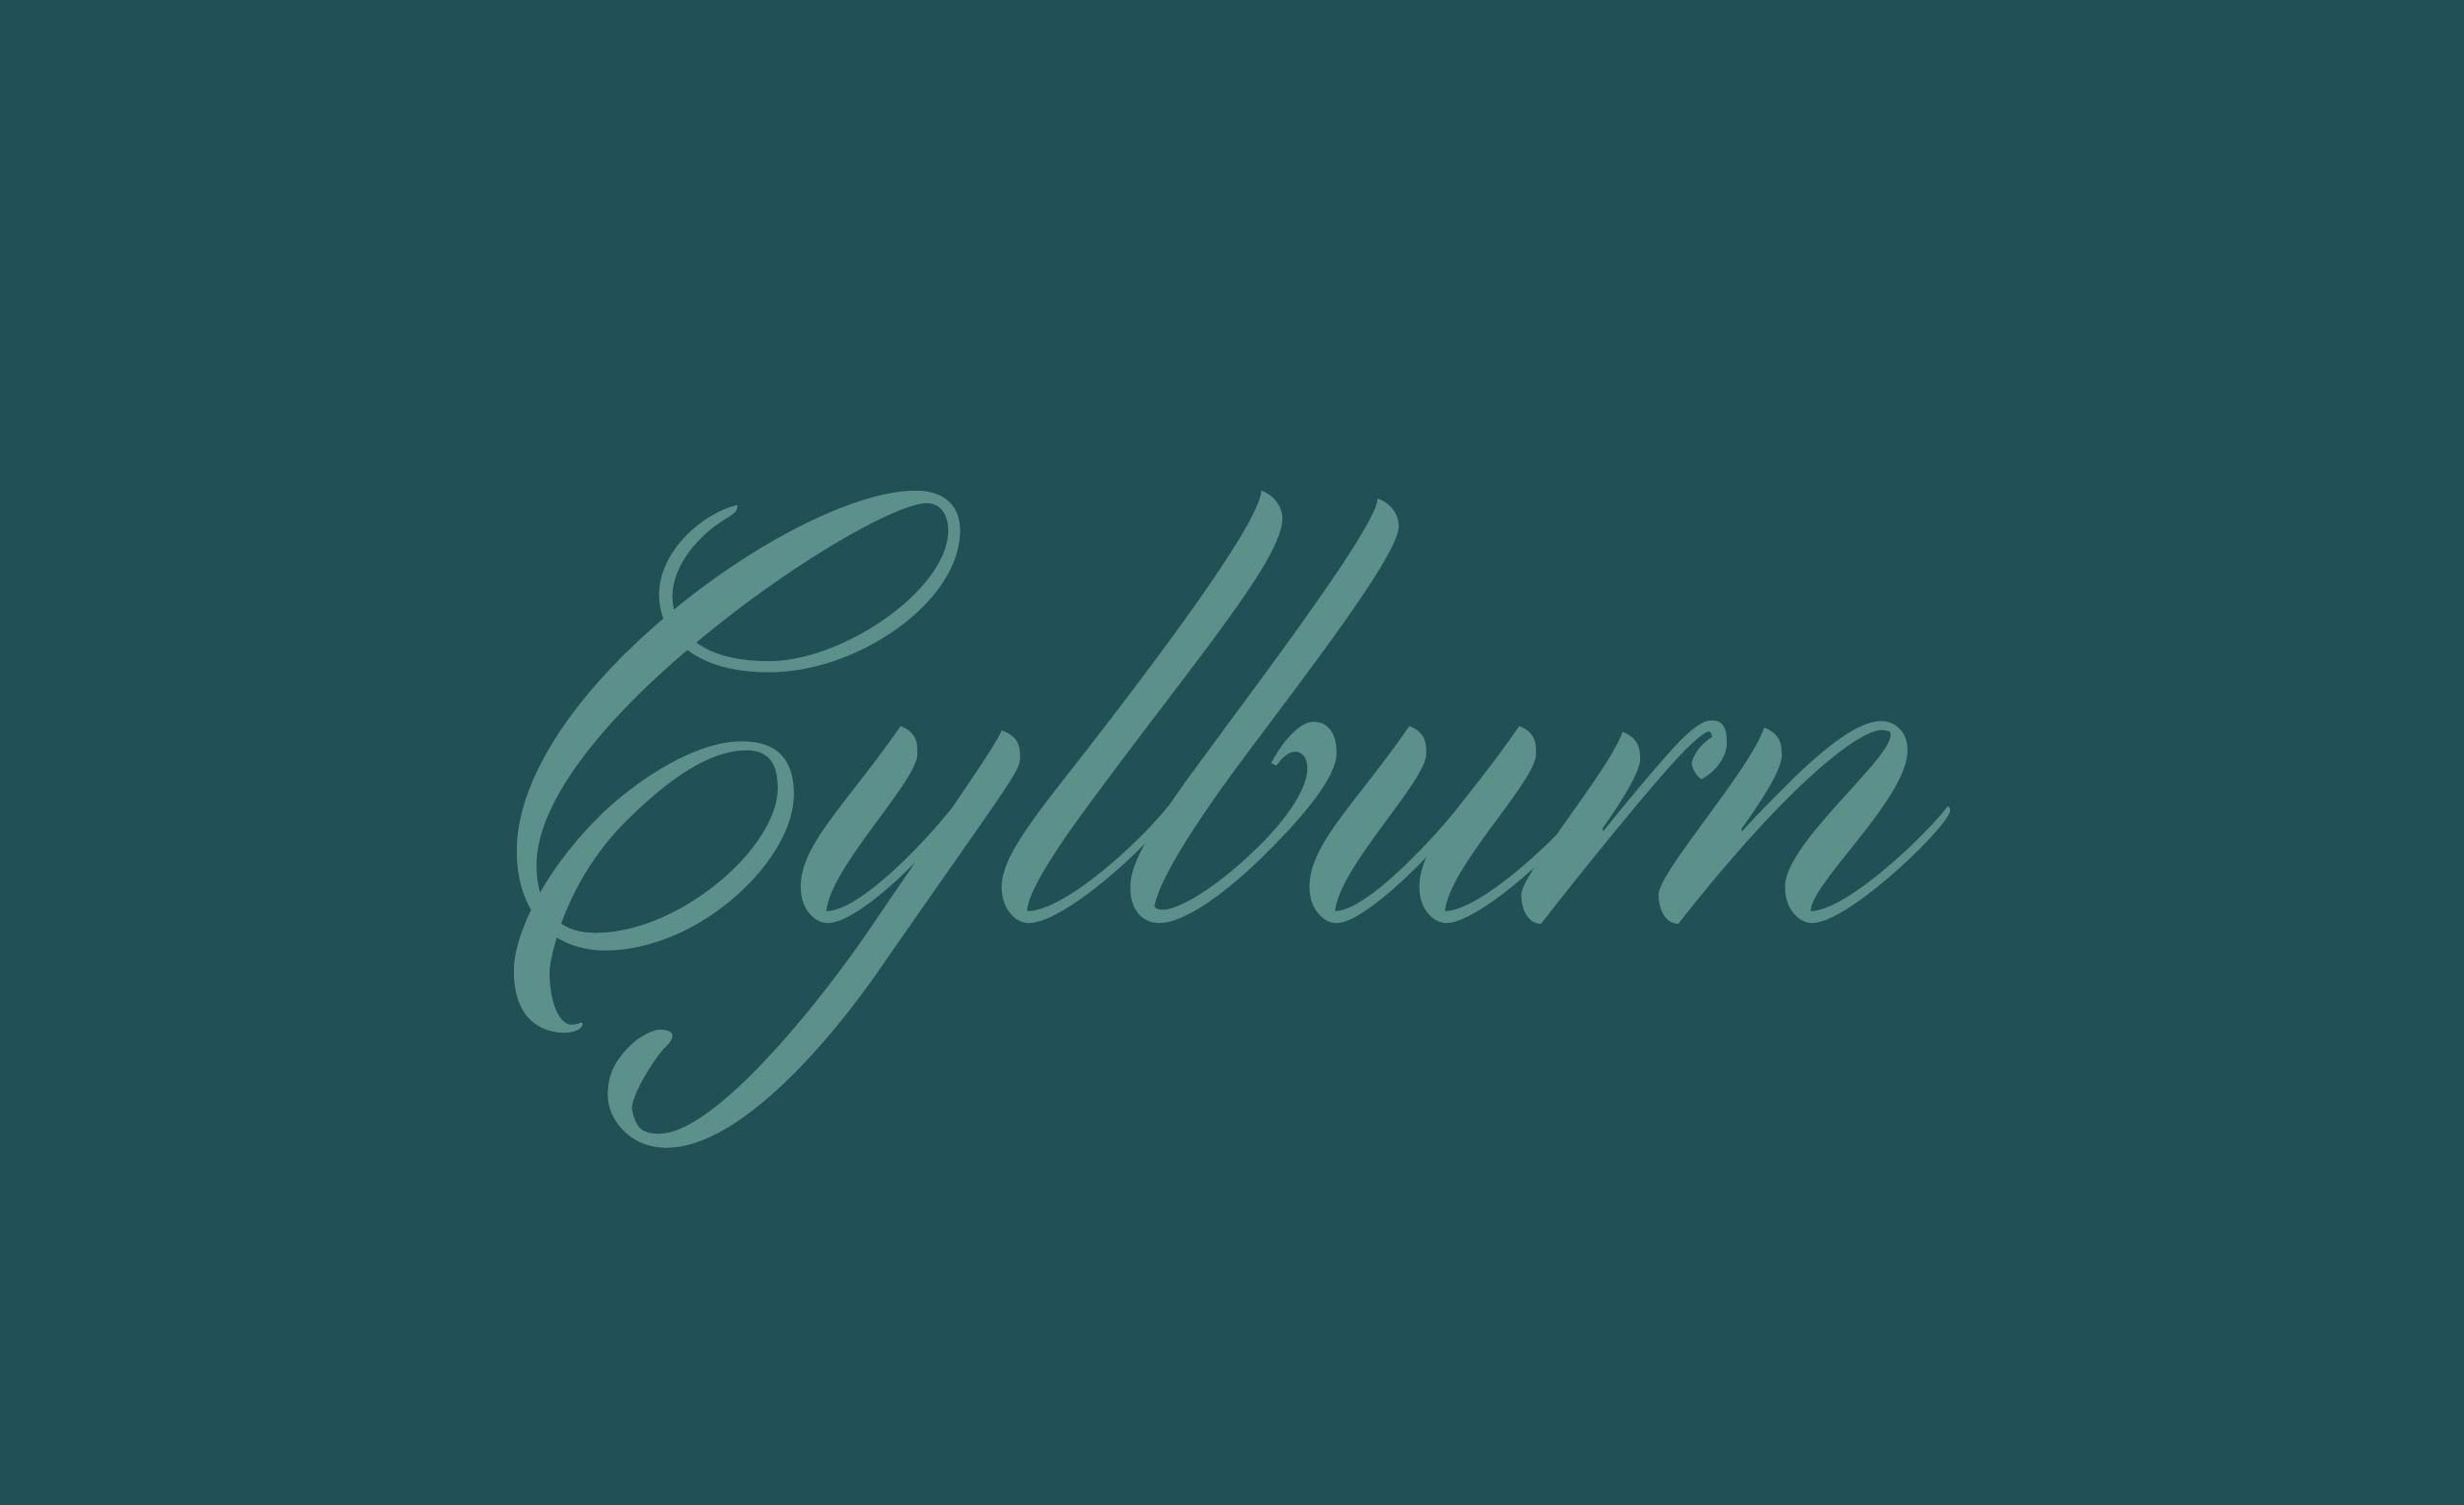 Cylburn is a supporting typeface in the Dream Floors brand identity.